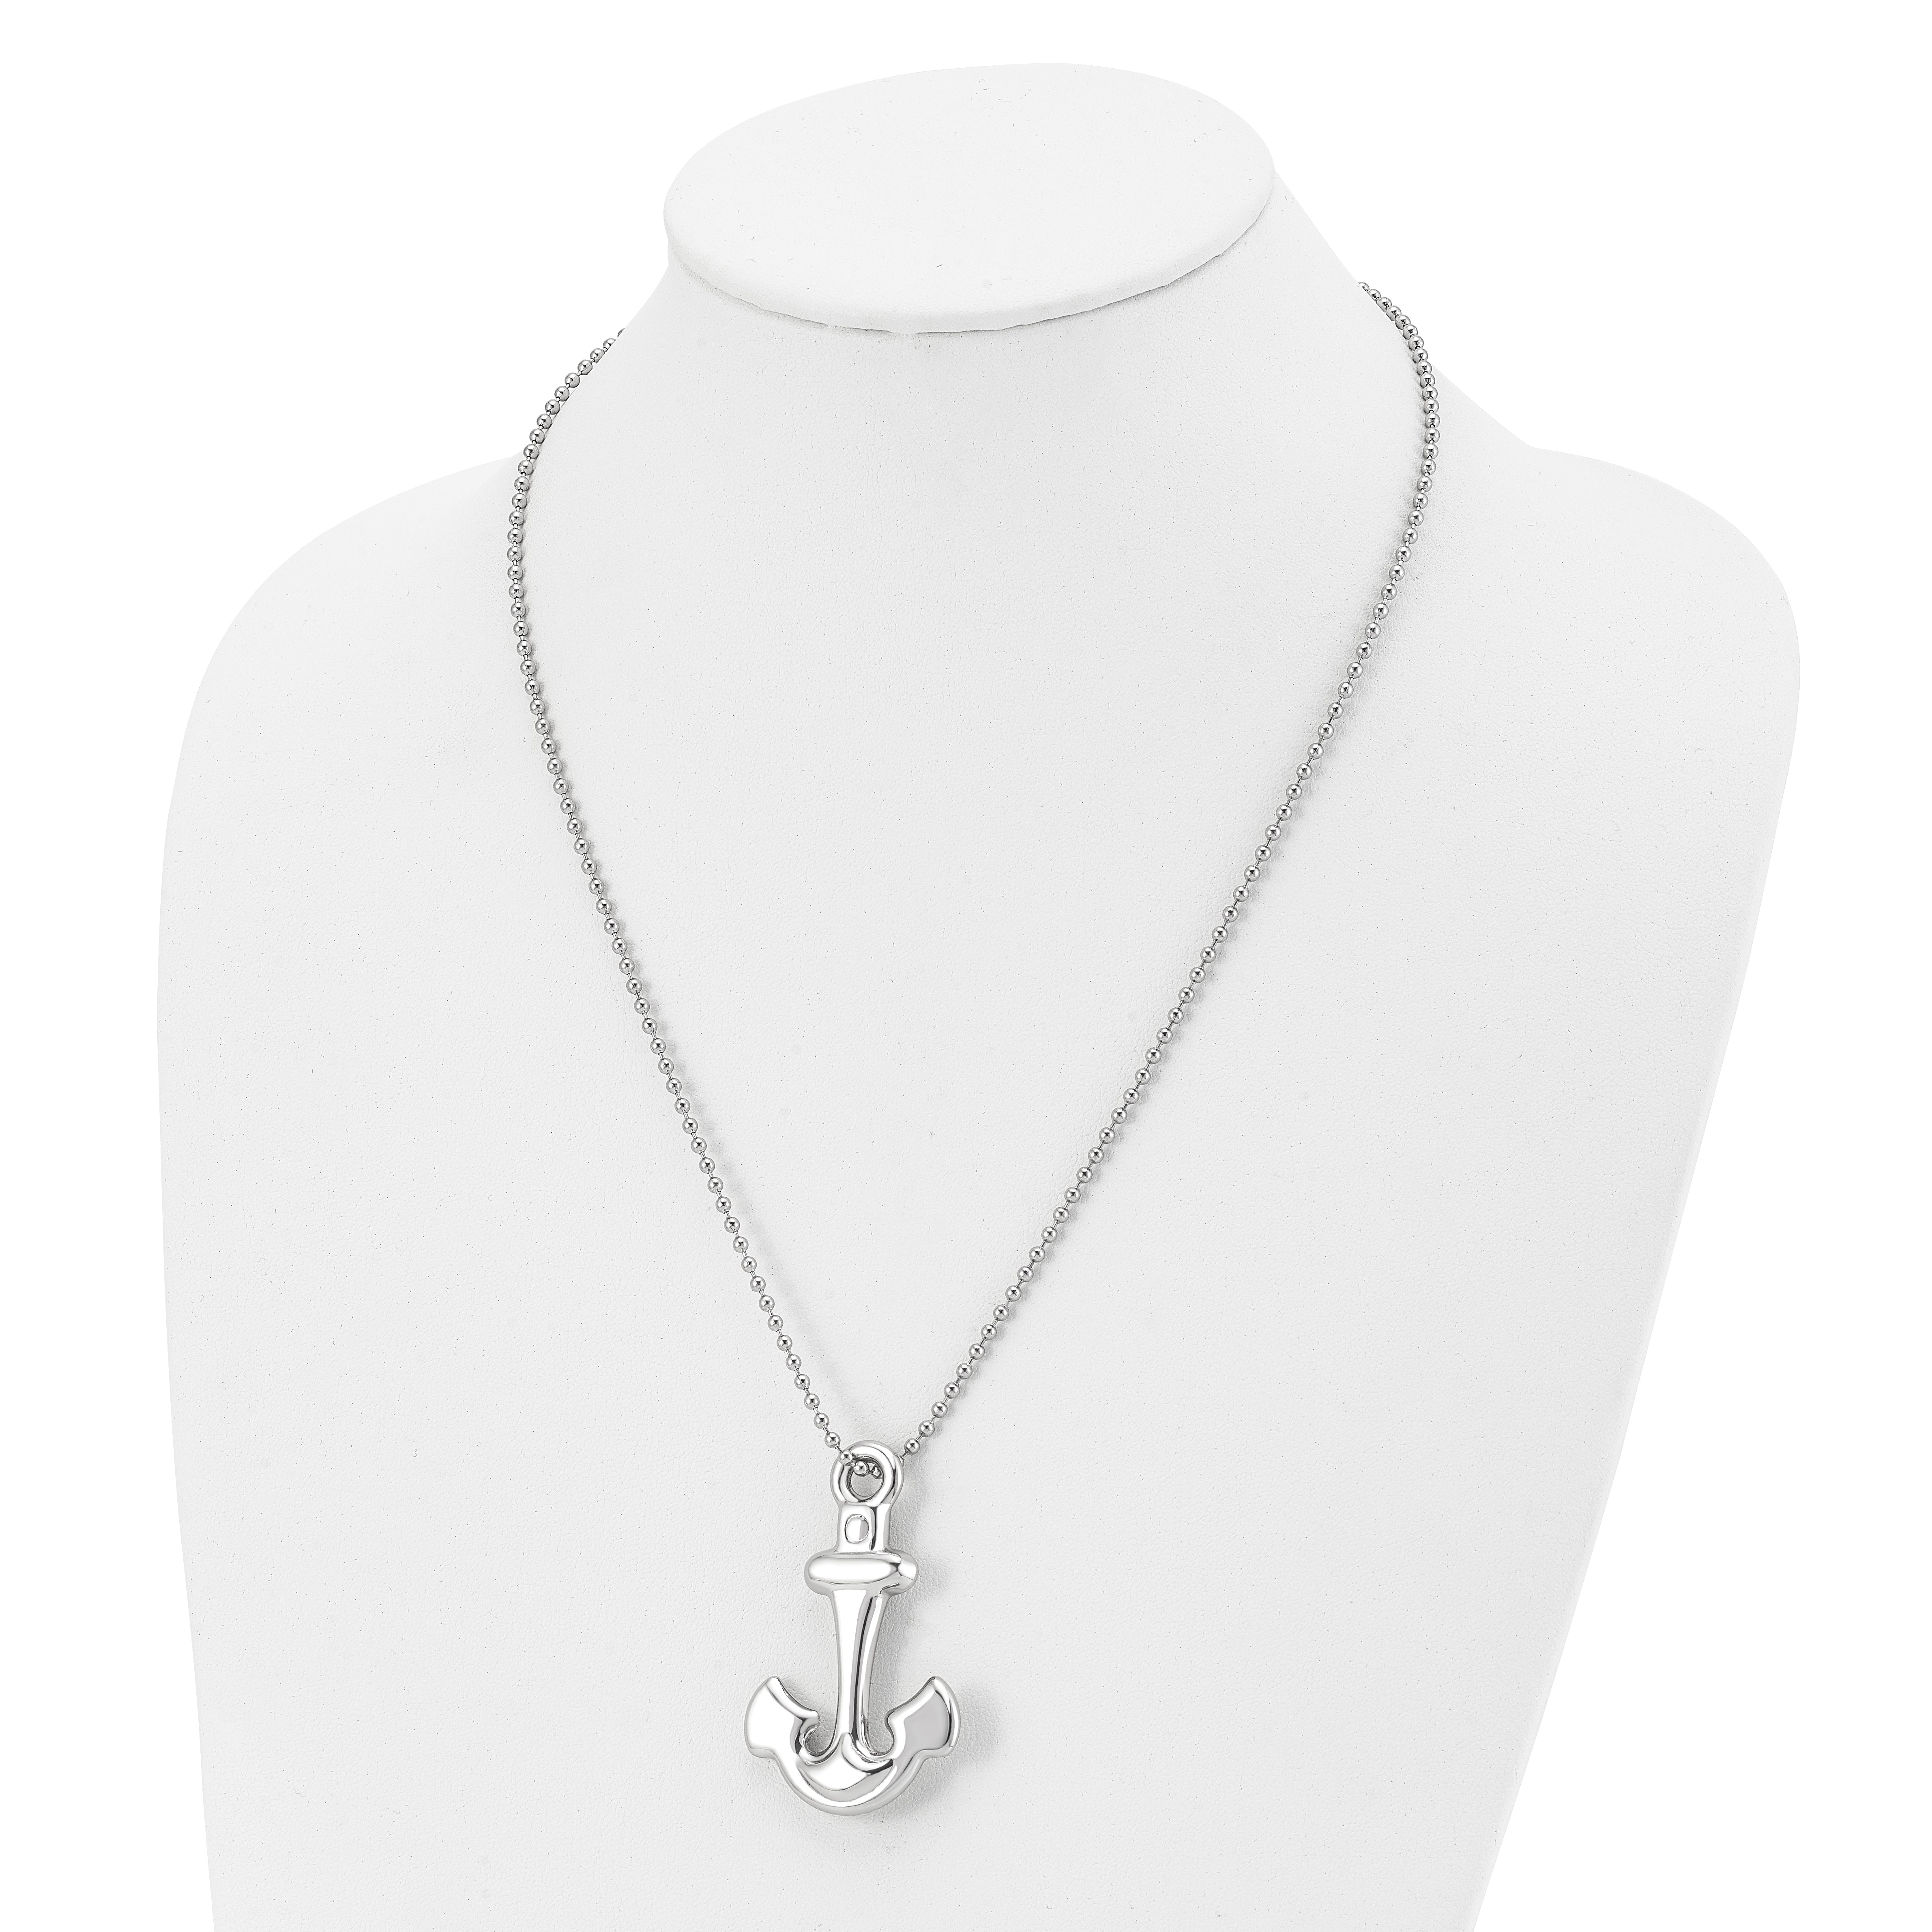 Chisel Stainless Steel Polished Hollow Anchor Pendant on a 22 inch Ball Chain Necklace